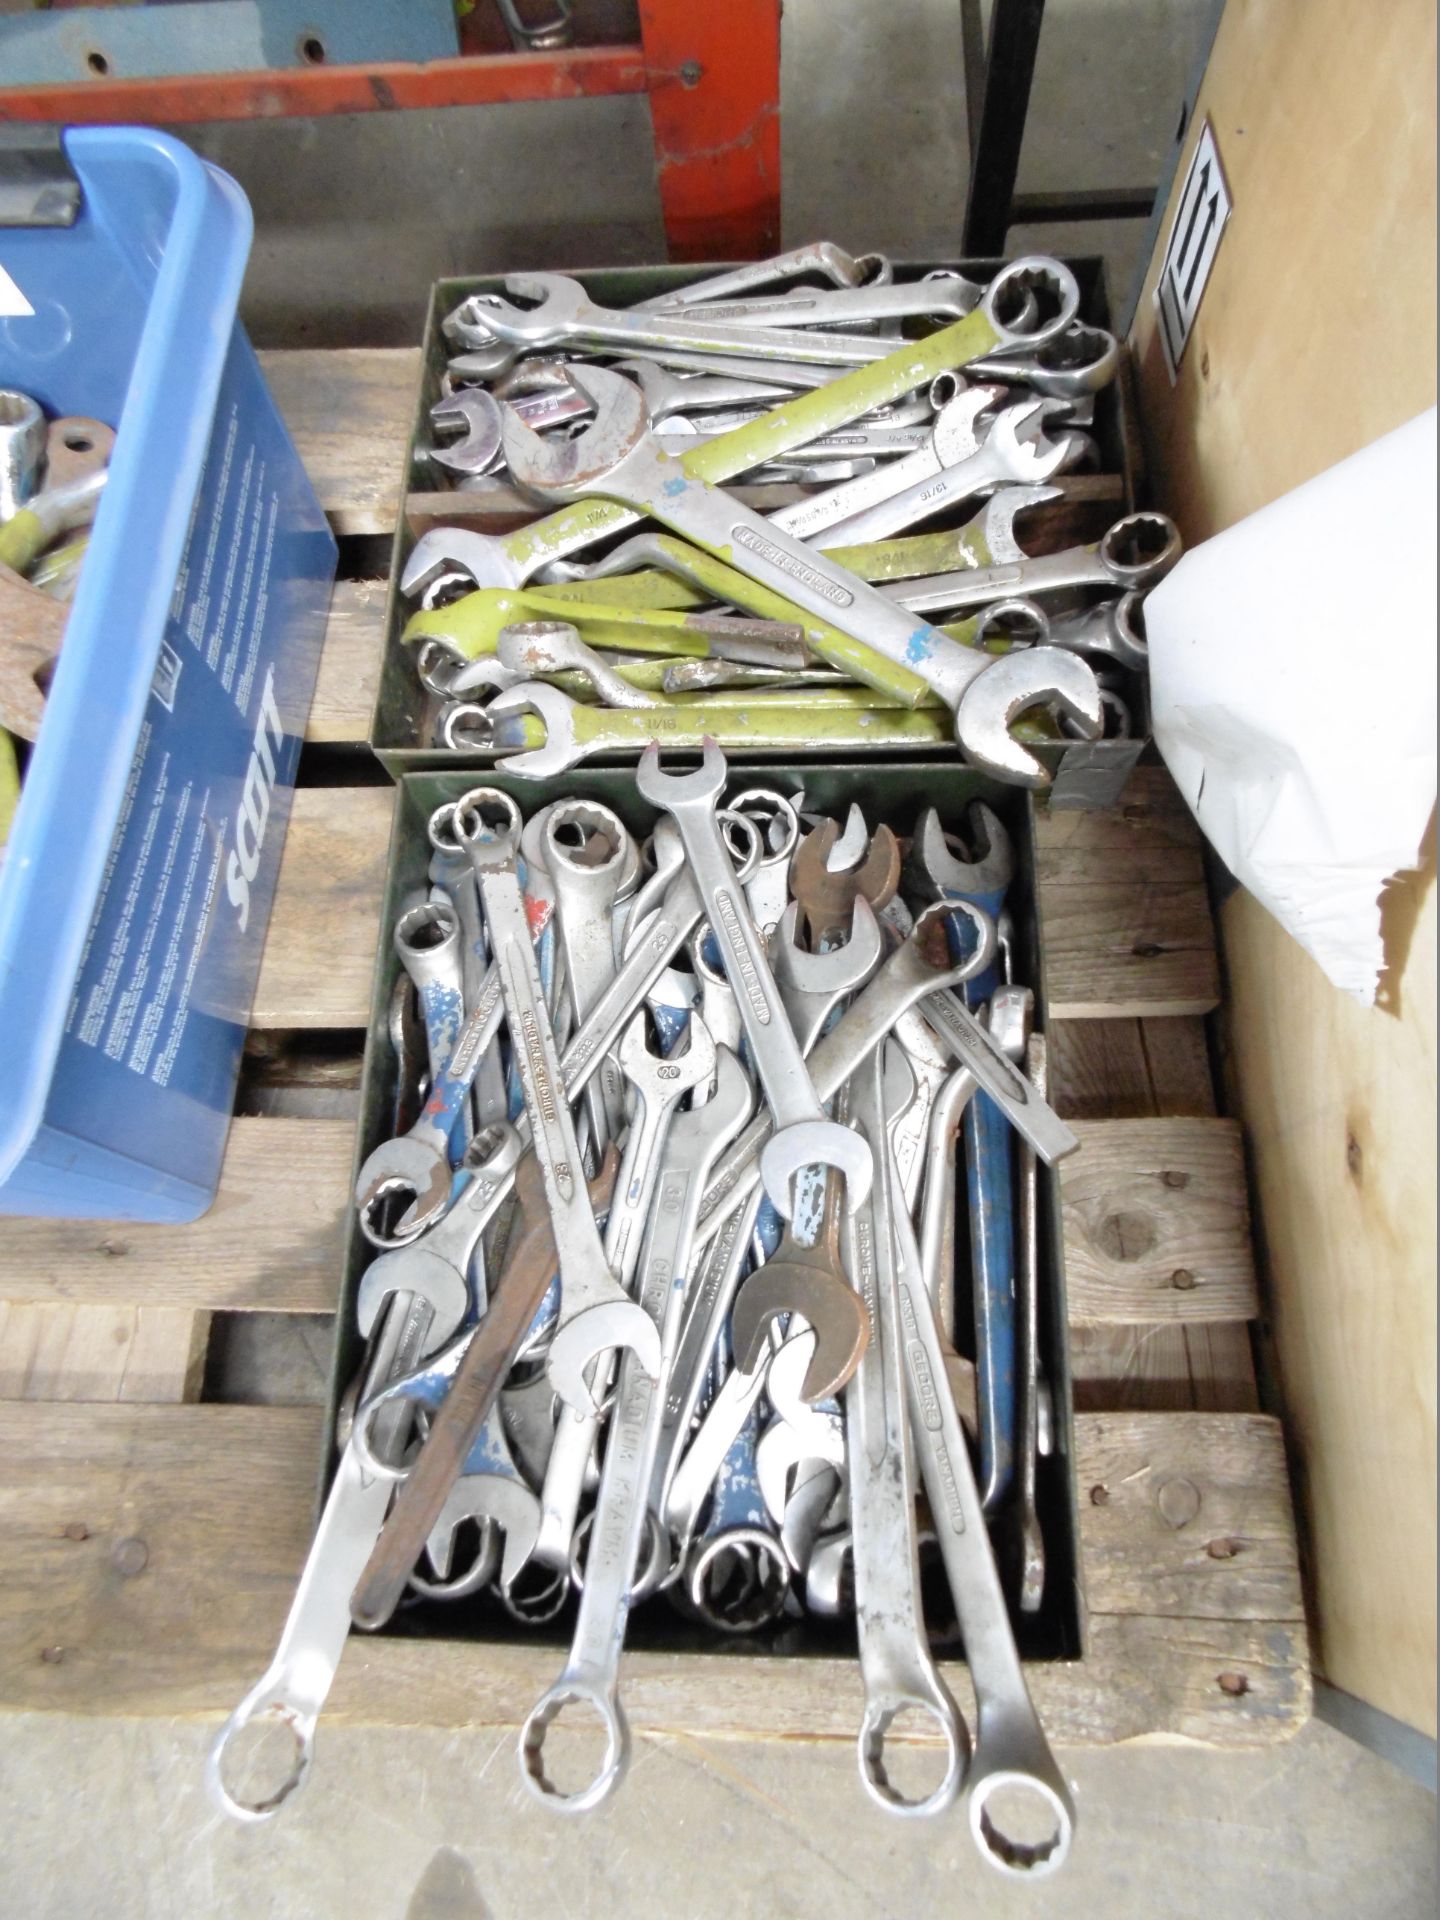 * 2 x Trays of various spanners